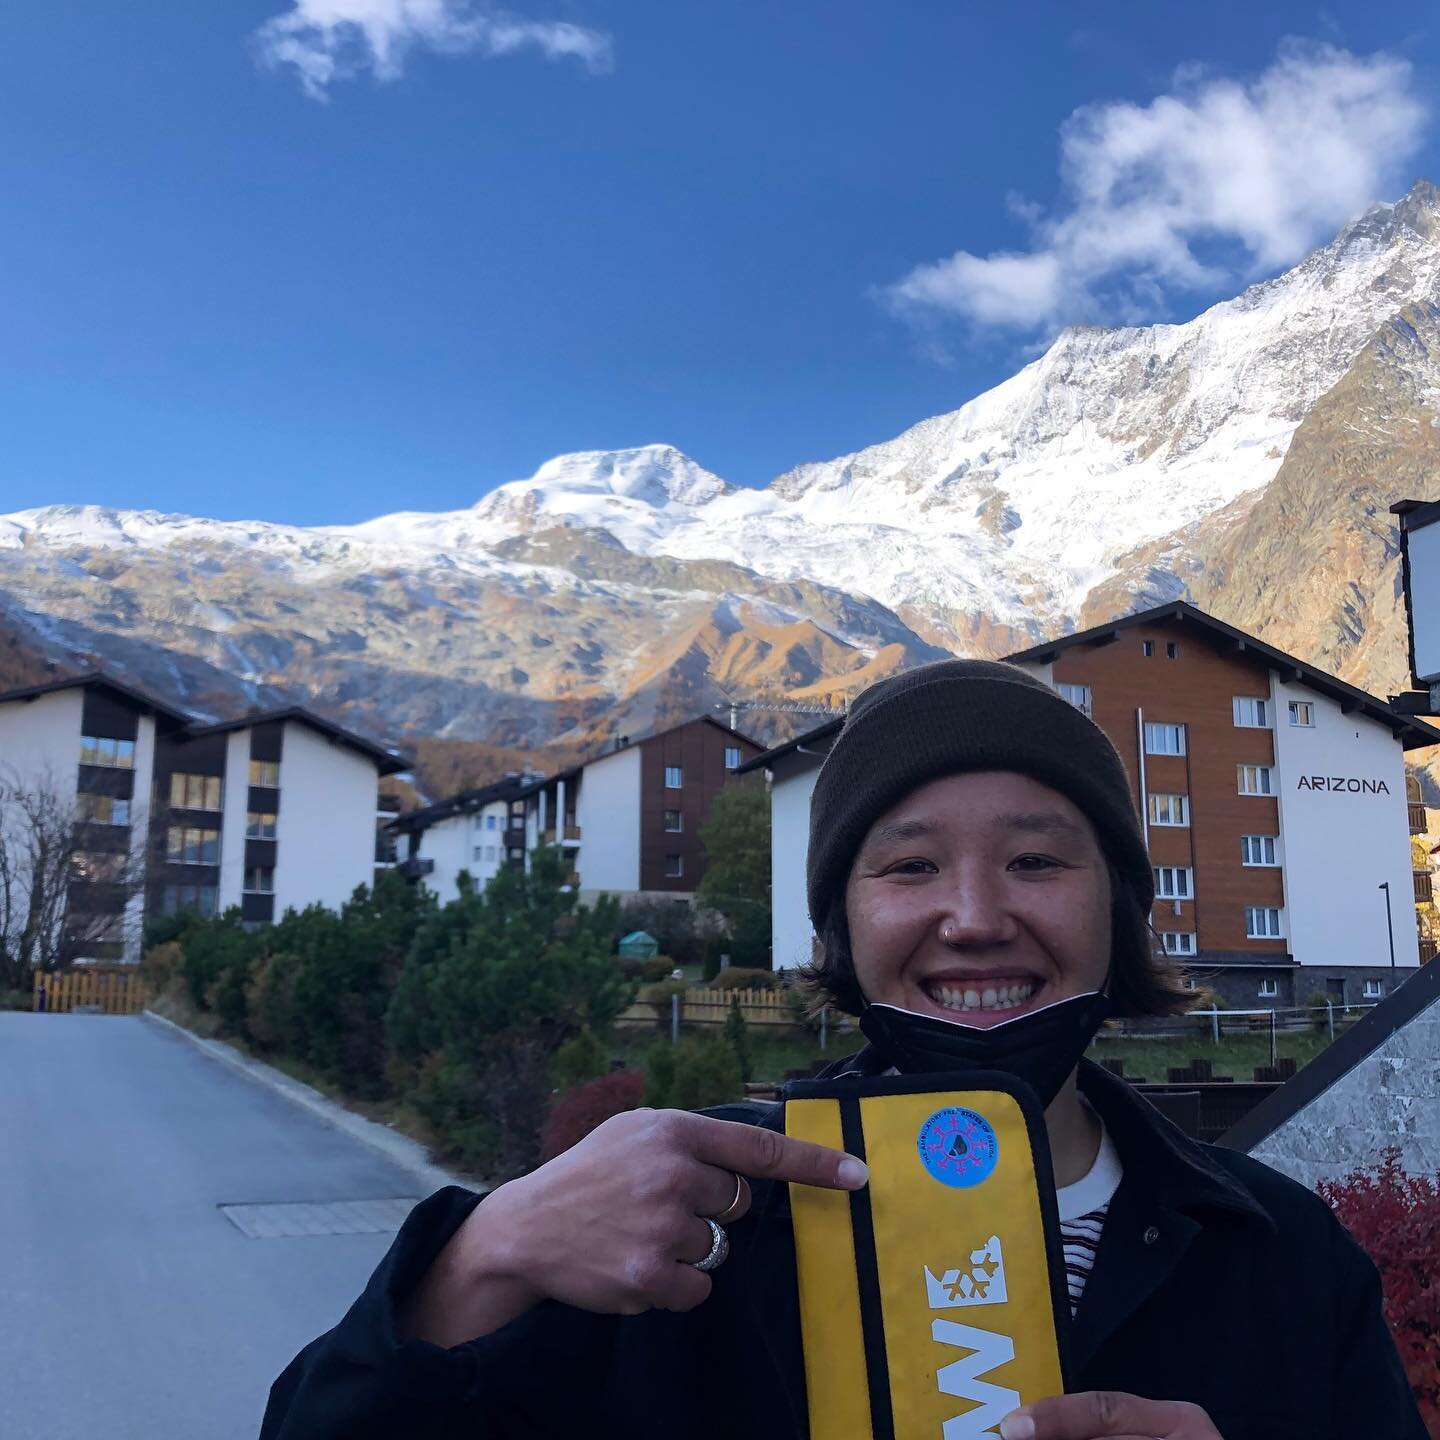 @callanthegreat is representing Obsidia while coaching the US Paralympic snowboarding team in the Swiss Alps! 
Callen is an activist for climate and native issues and was the first Alaskan native to be on the US snowboarding team.

As an enthusiastic